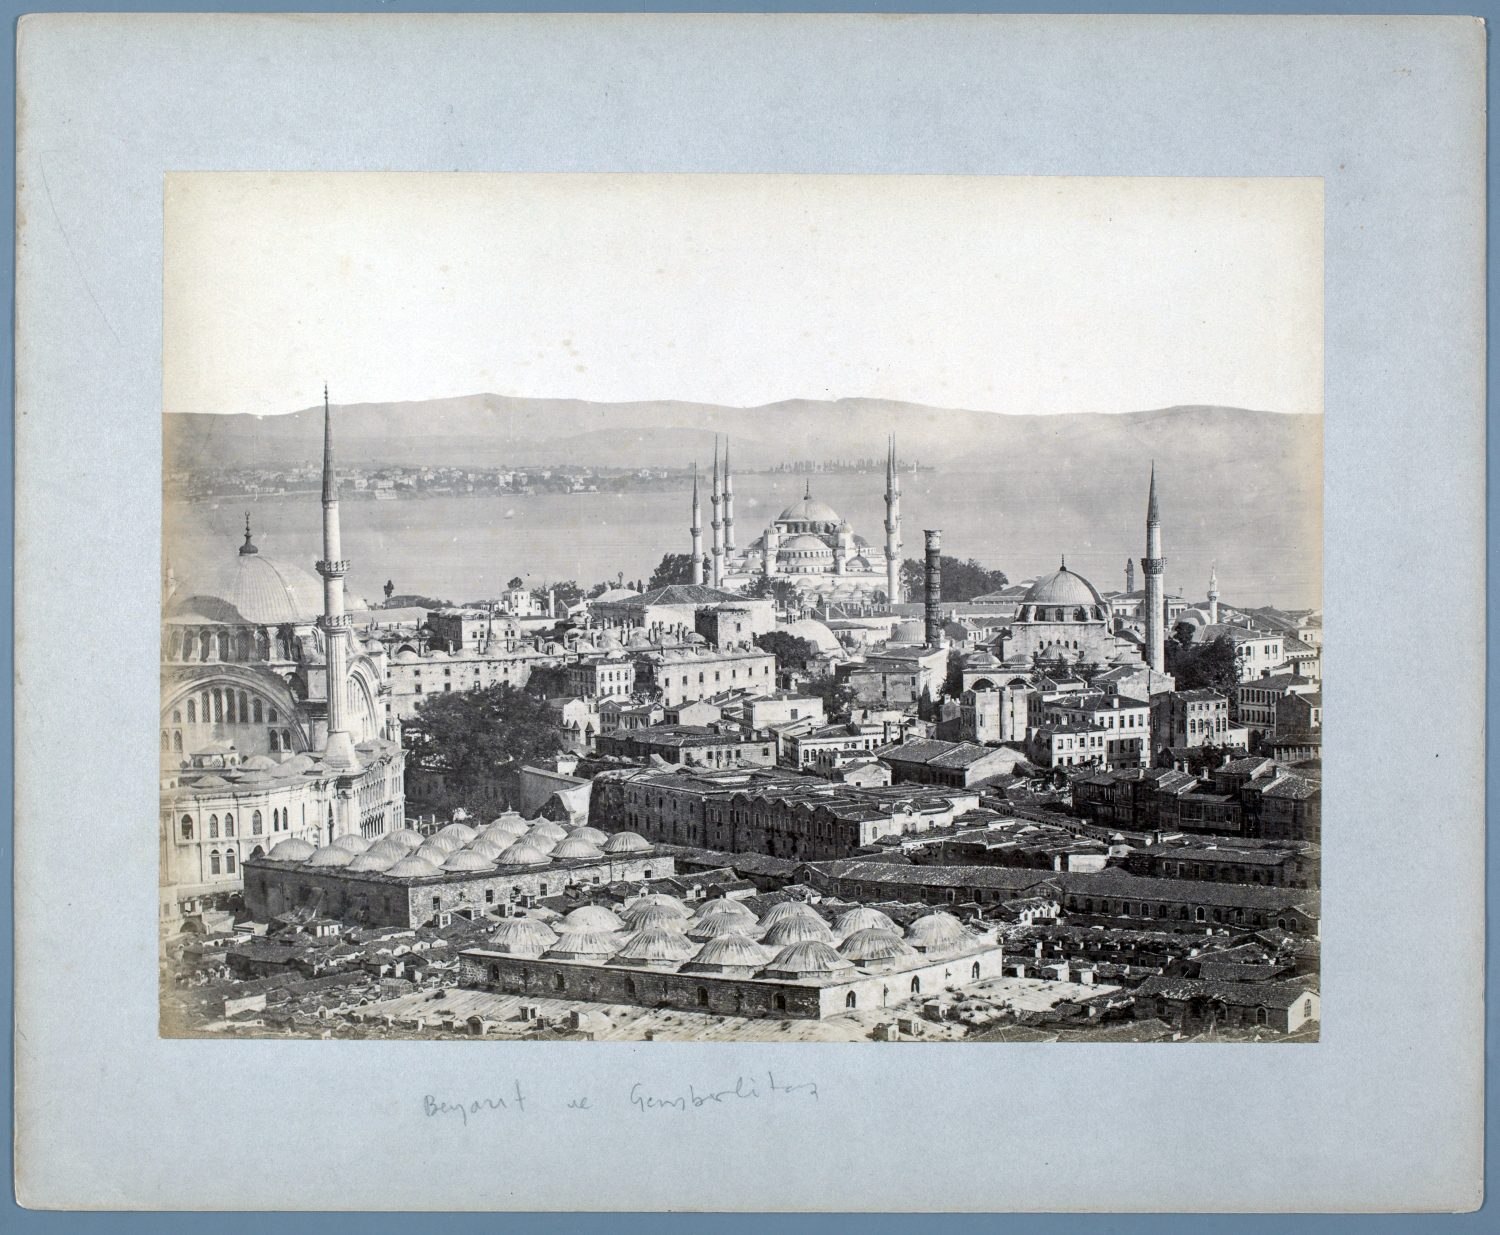 Bird's-eye view of Istanbul, with the Nuruosmaniye Camii in the left foreground and the Sultanahmet Camii in the center distance